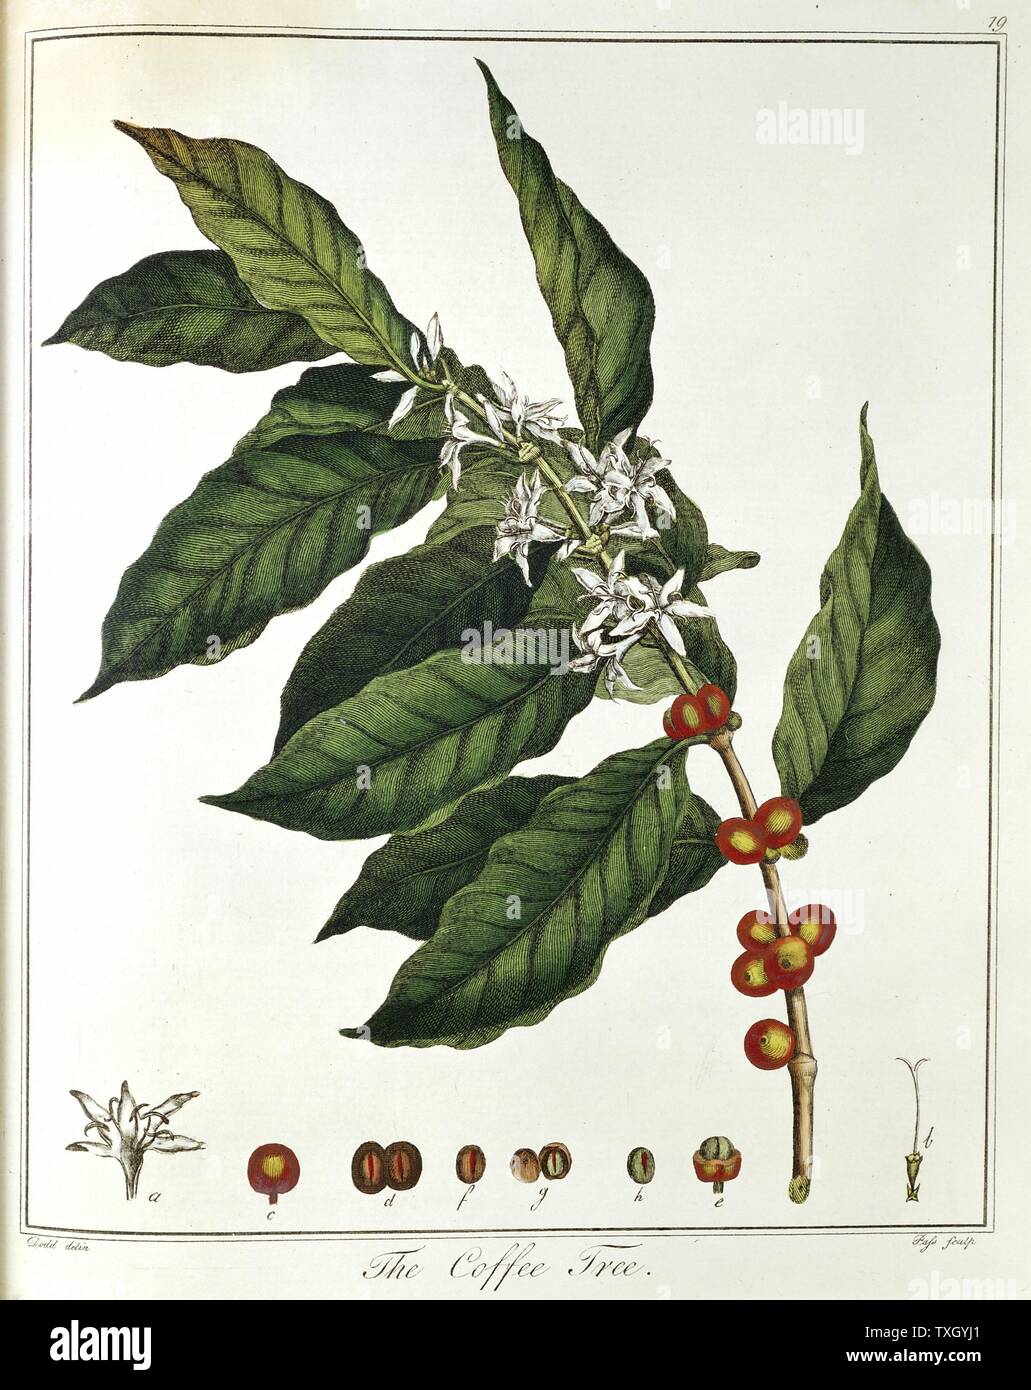 Sprig of Coffee (Coffea arabica) showing flowers and beans. Hand-coloured engraving published London 1798 Stock Photo